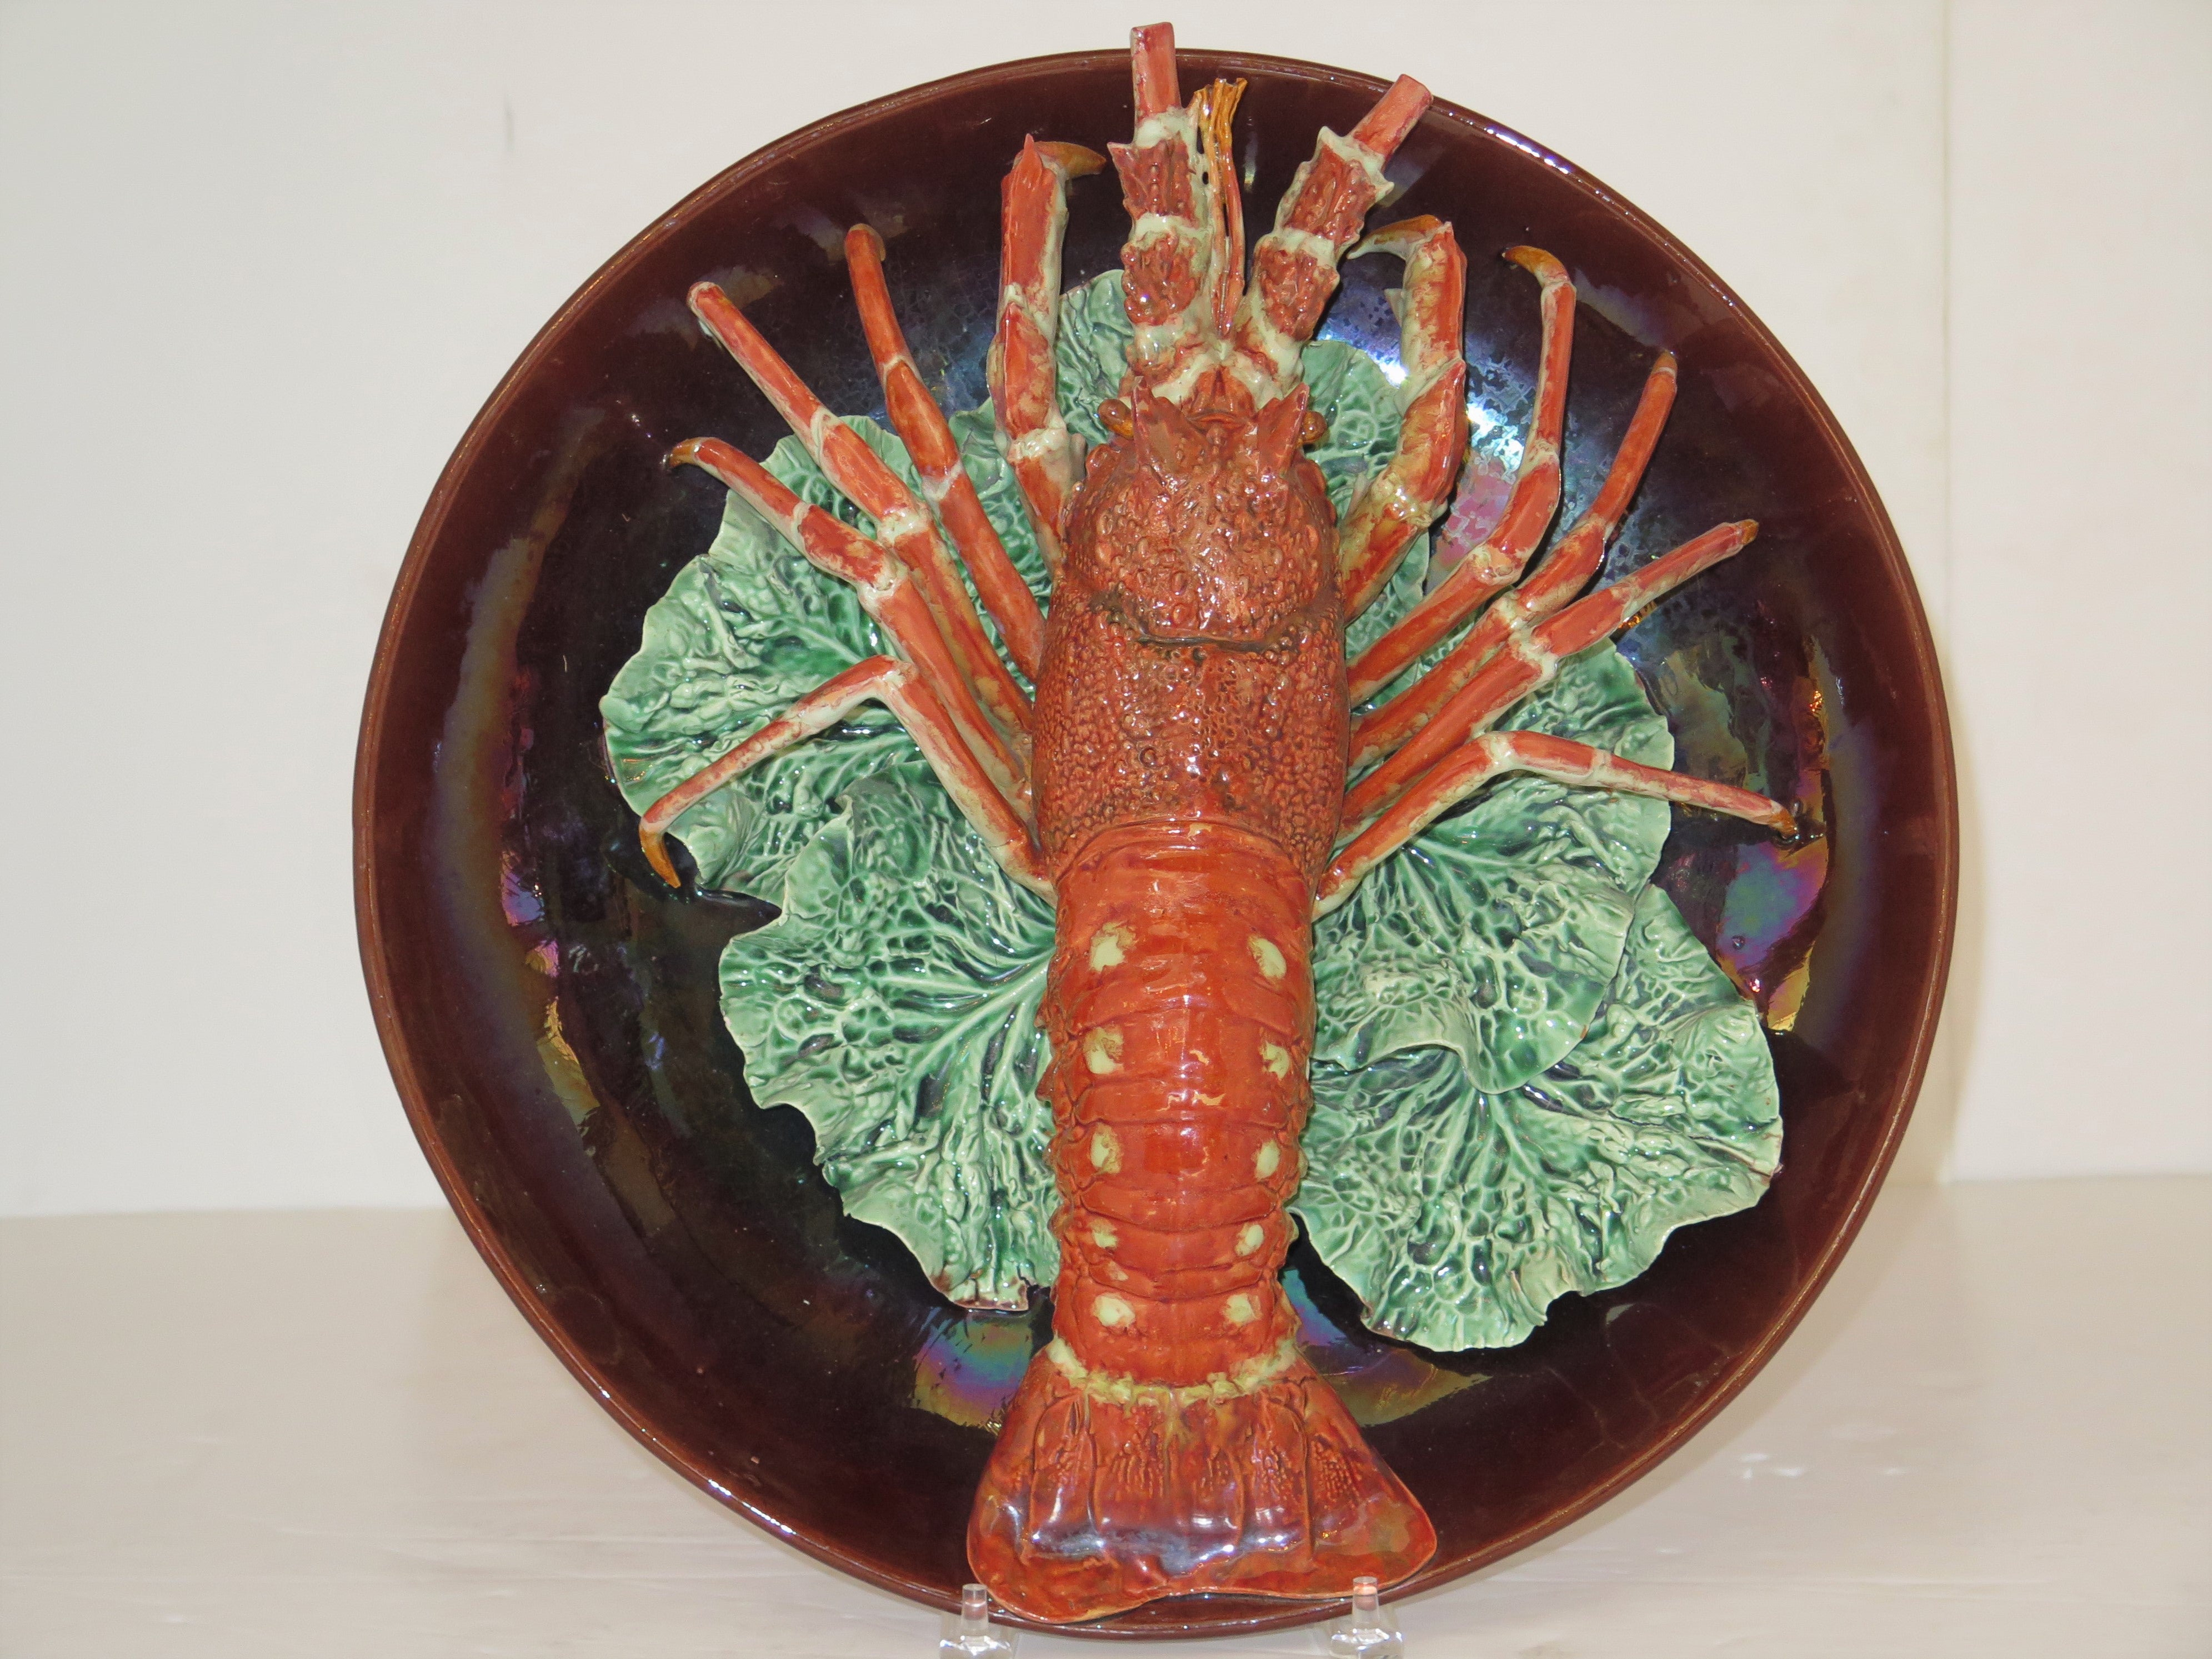 Large-Scale VERY RARE Single Lobster on Cabbage by Rafael Bordalo Pinheiro (Portugal, 1846-1905)